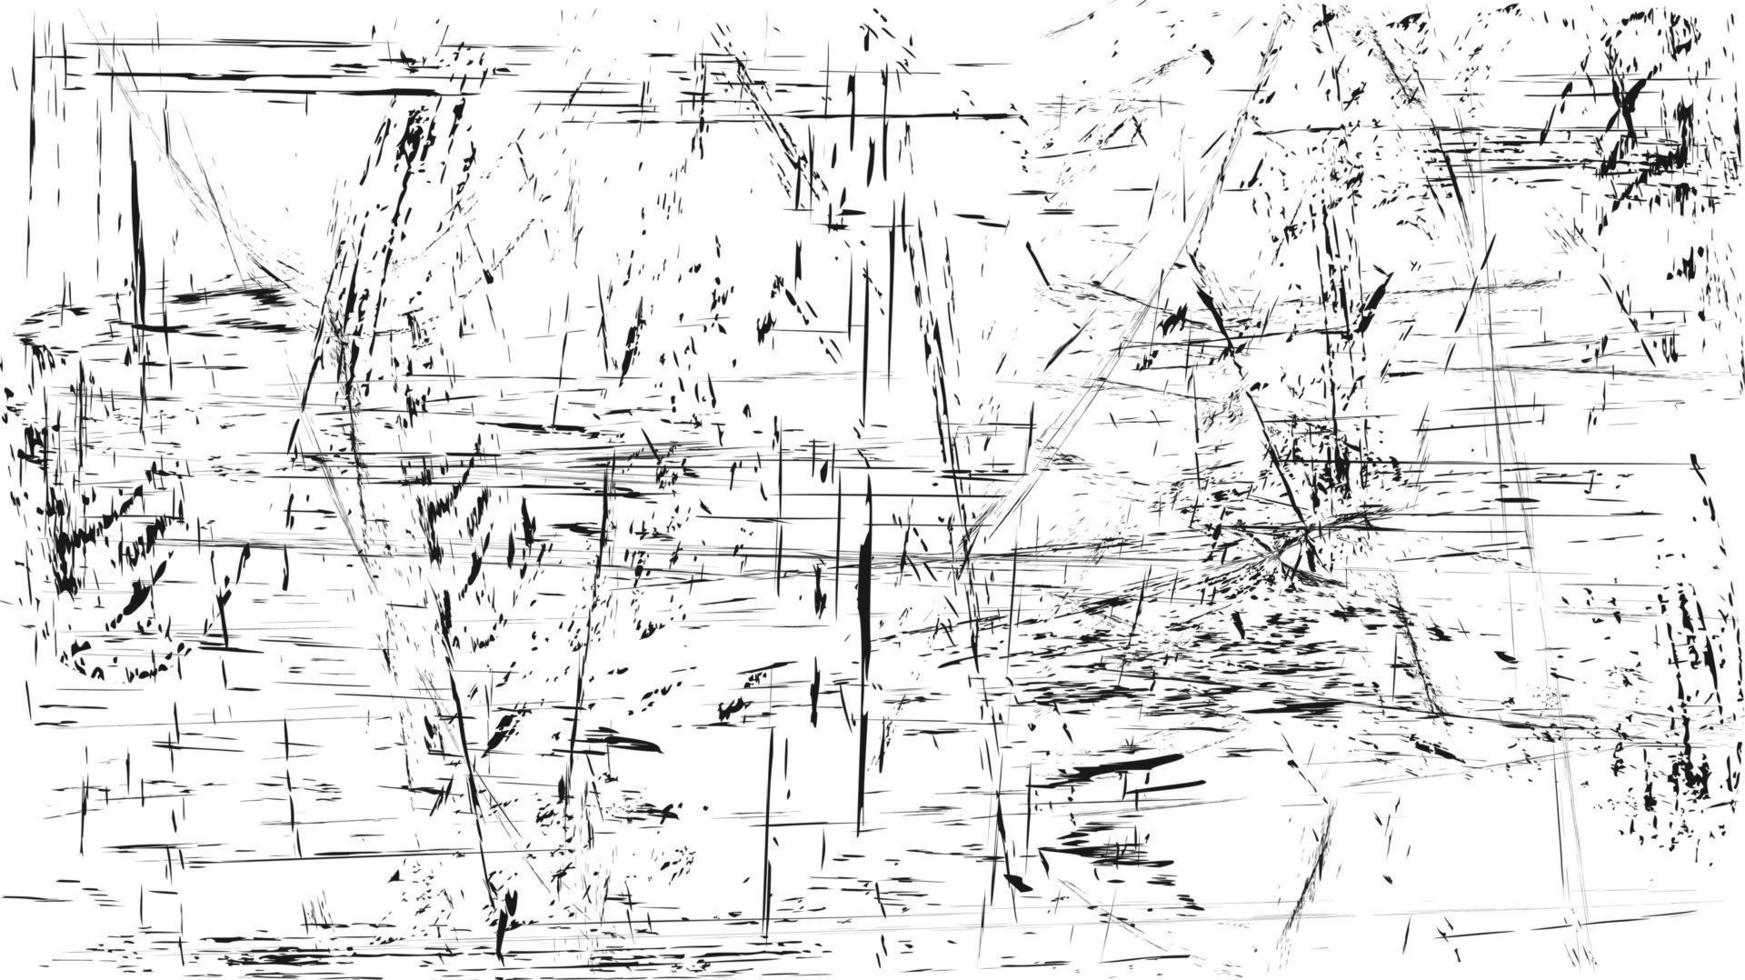 Gritty Dirty Scratched Screen Scribble Vector Vignette Image Filter Overlay Texture PNG